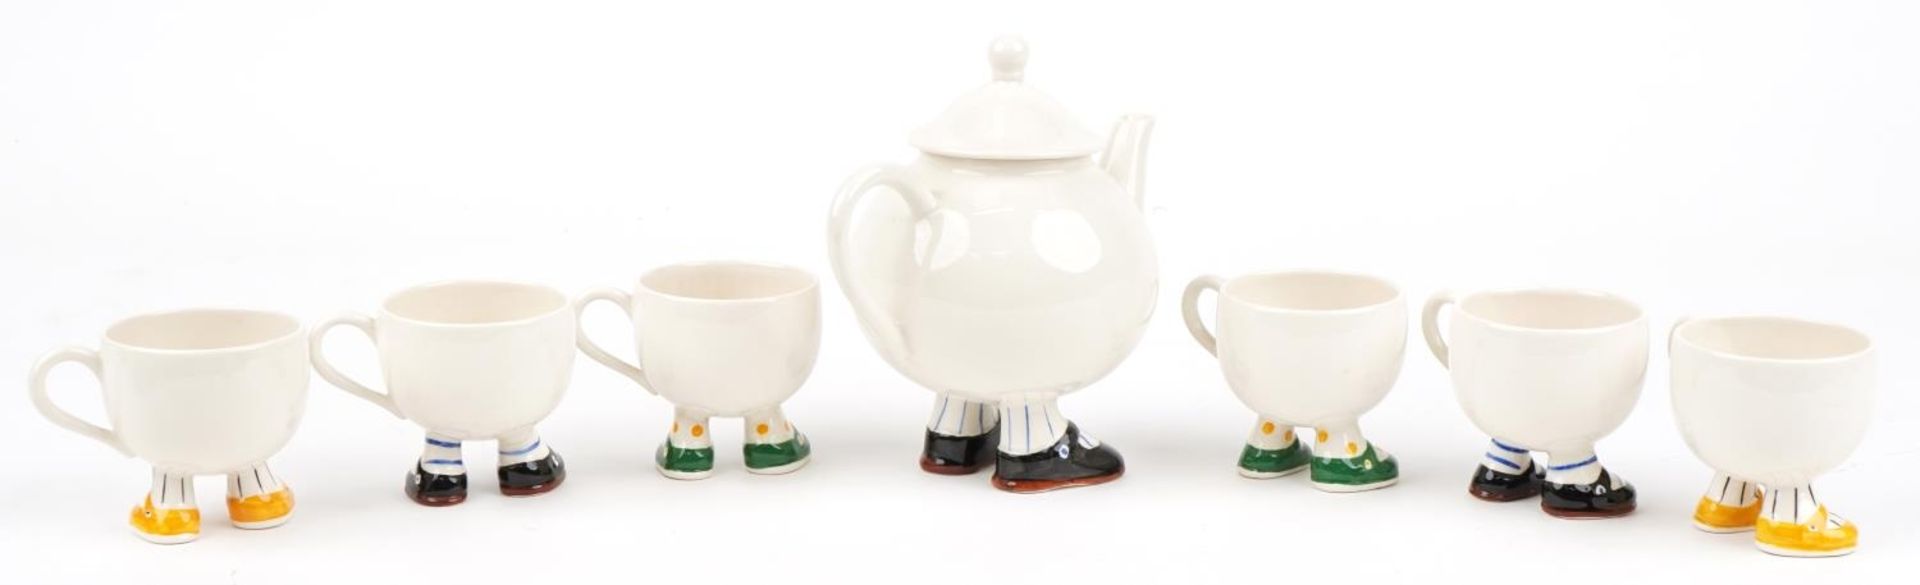 Carltonware Walking teaware comprising teapot and six cups, the largest 21cm in length - Image 7 of 12